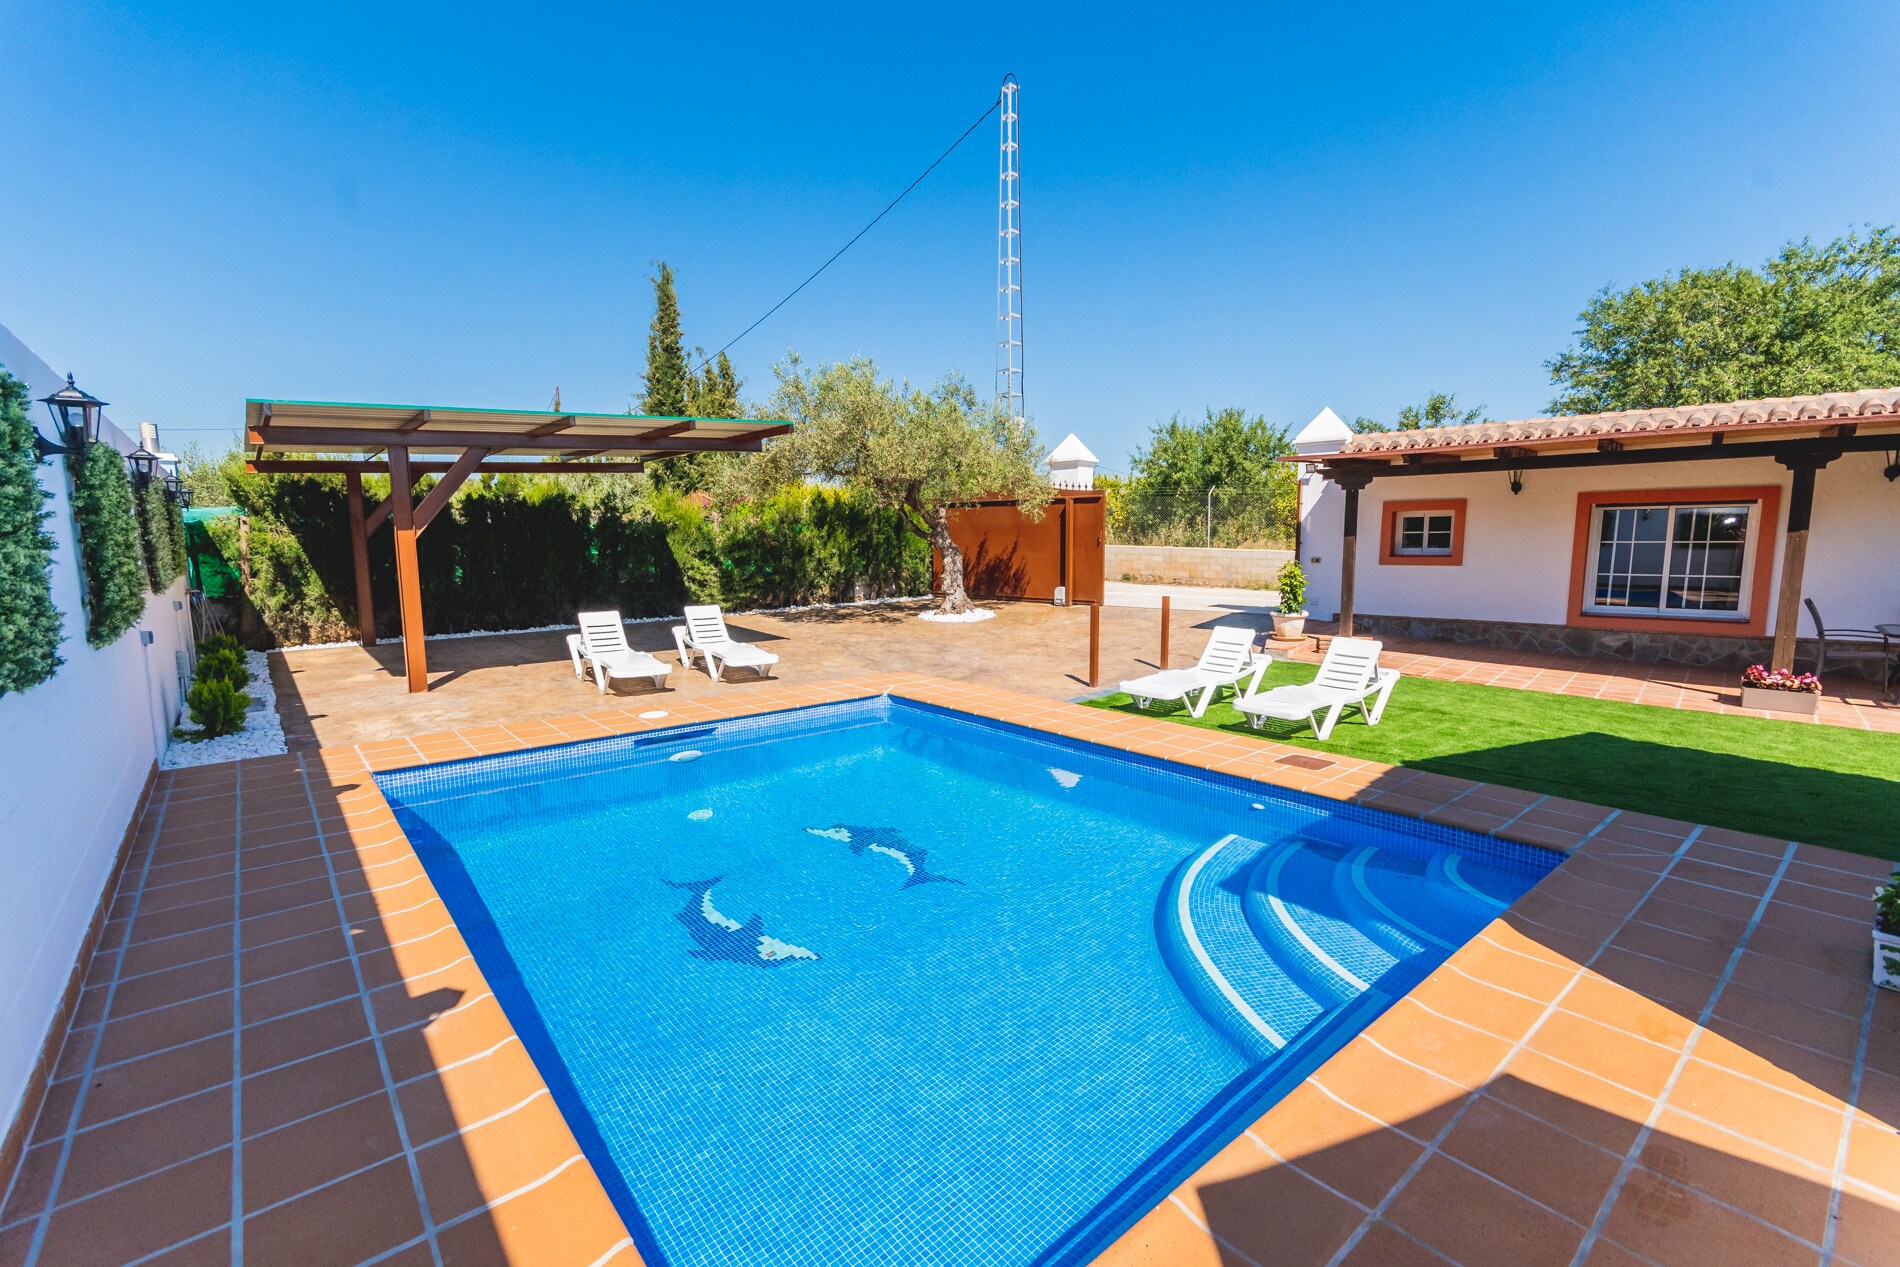 Enjoy the private pool of this rural house in Alhaurín el Grande